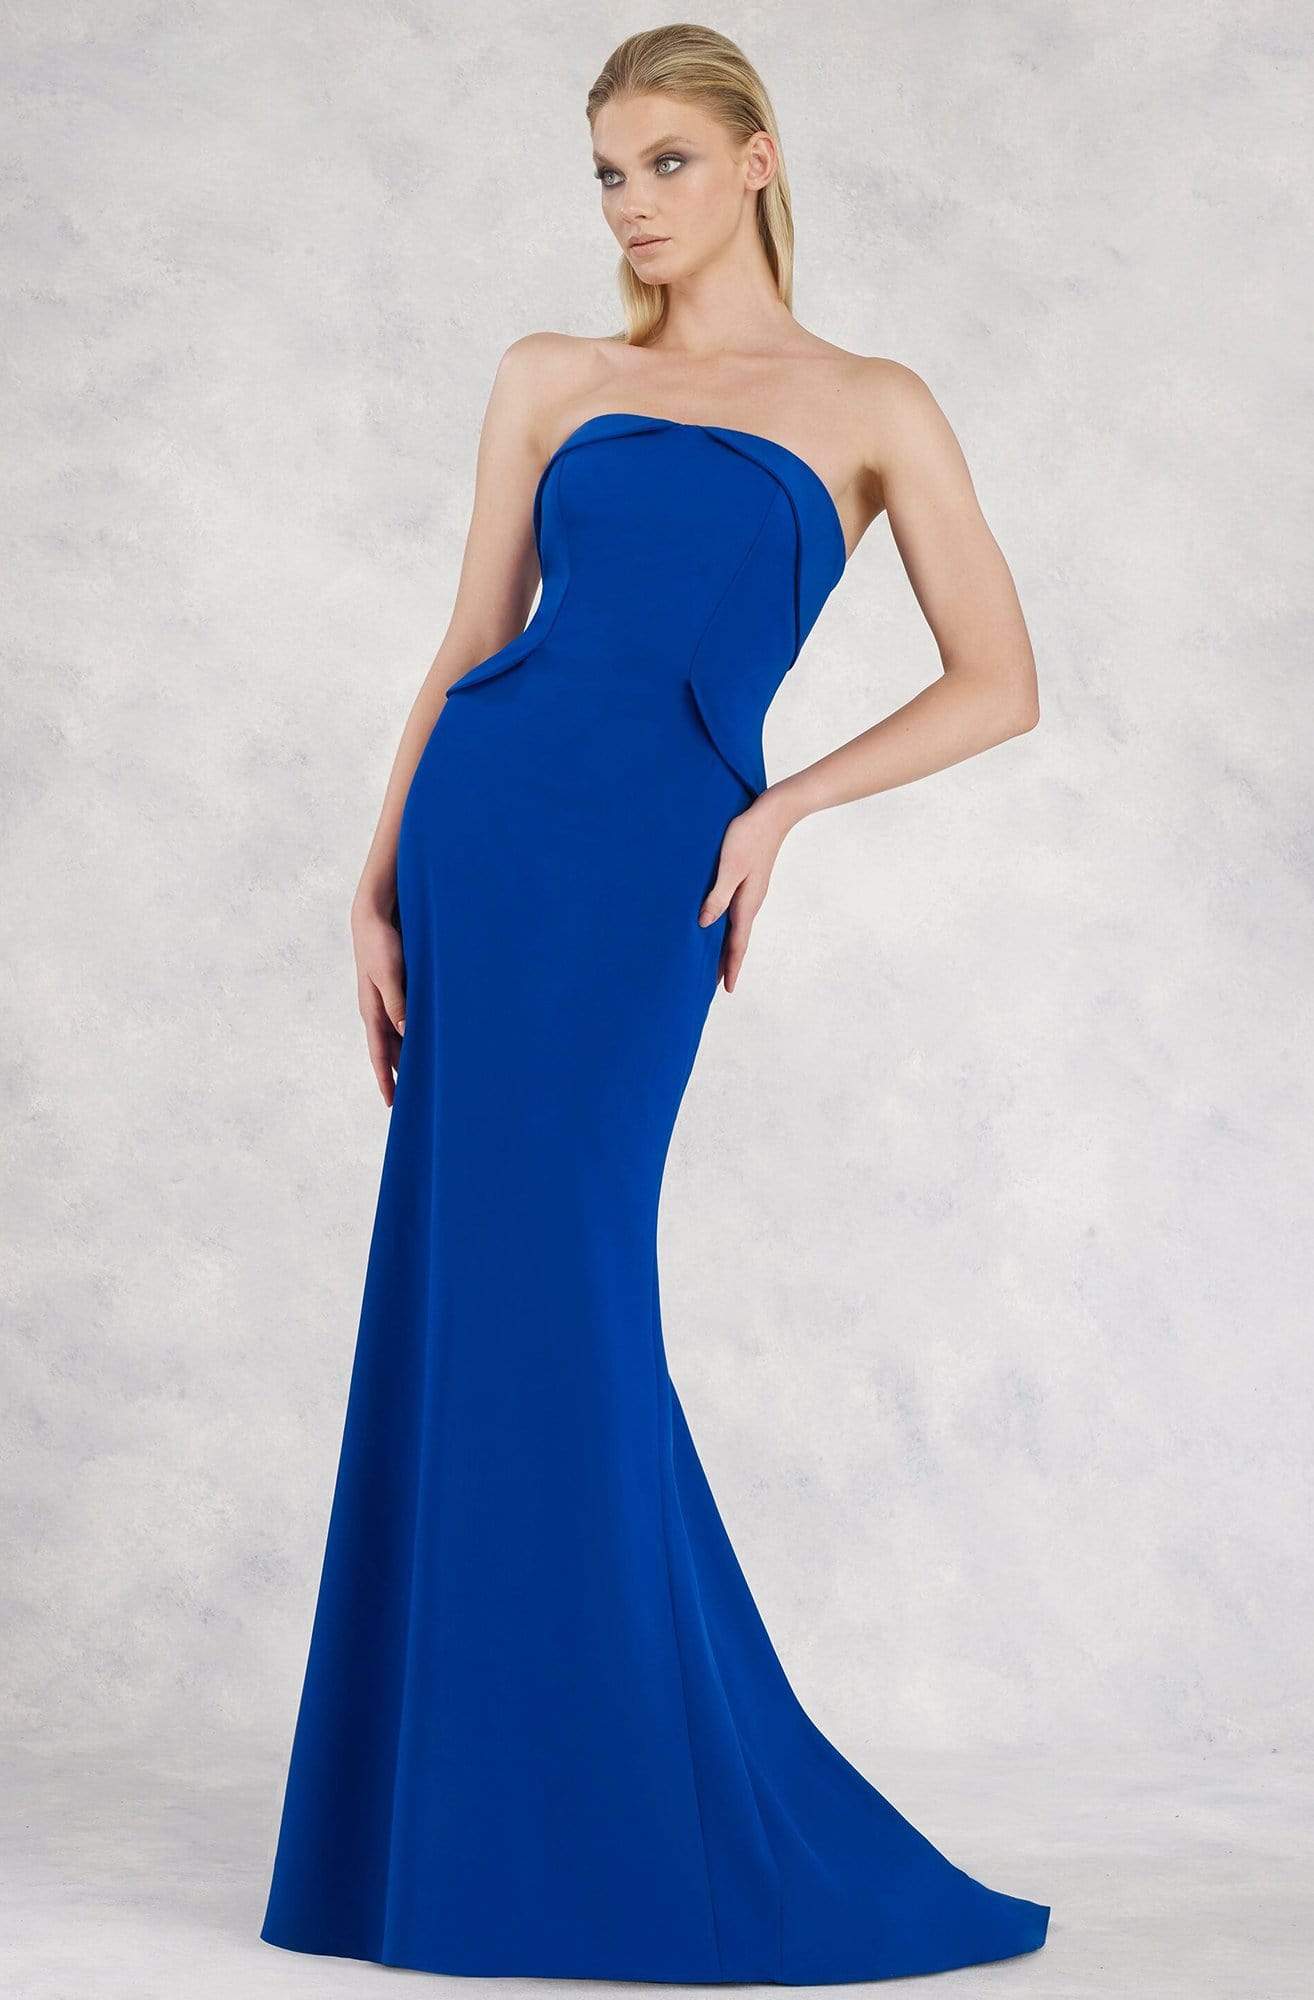 Janique - Strapless Folded Neckline Detail Stretch Crepe Gown With Side Peplum and Sweep Train C1167 Special Occasion Dress 10 / Royal